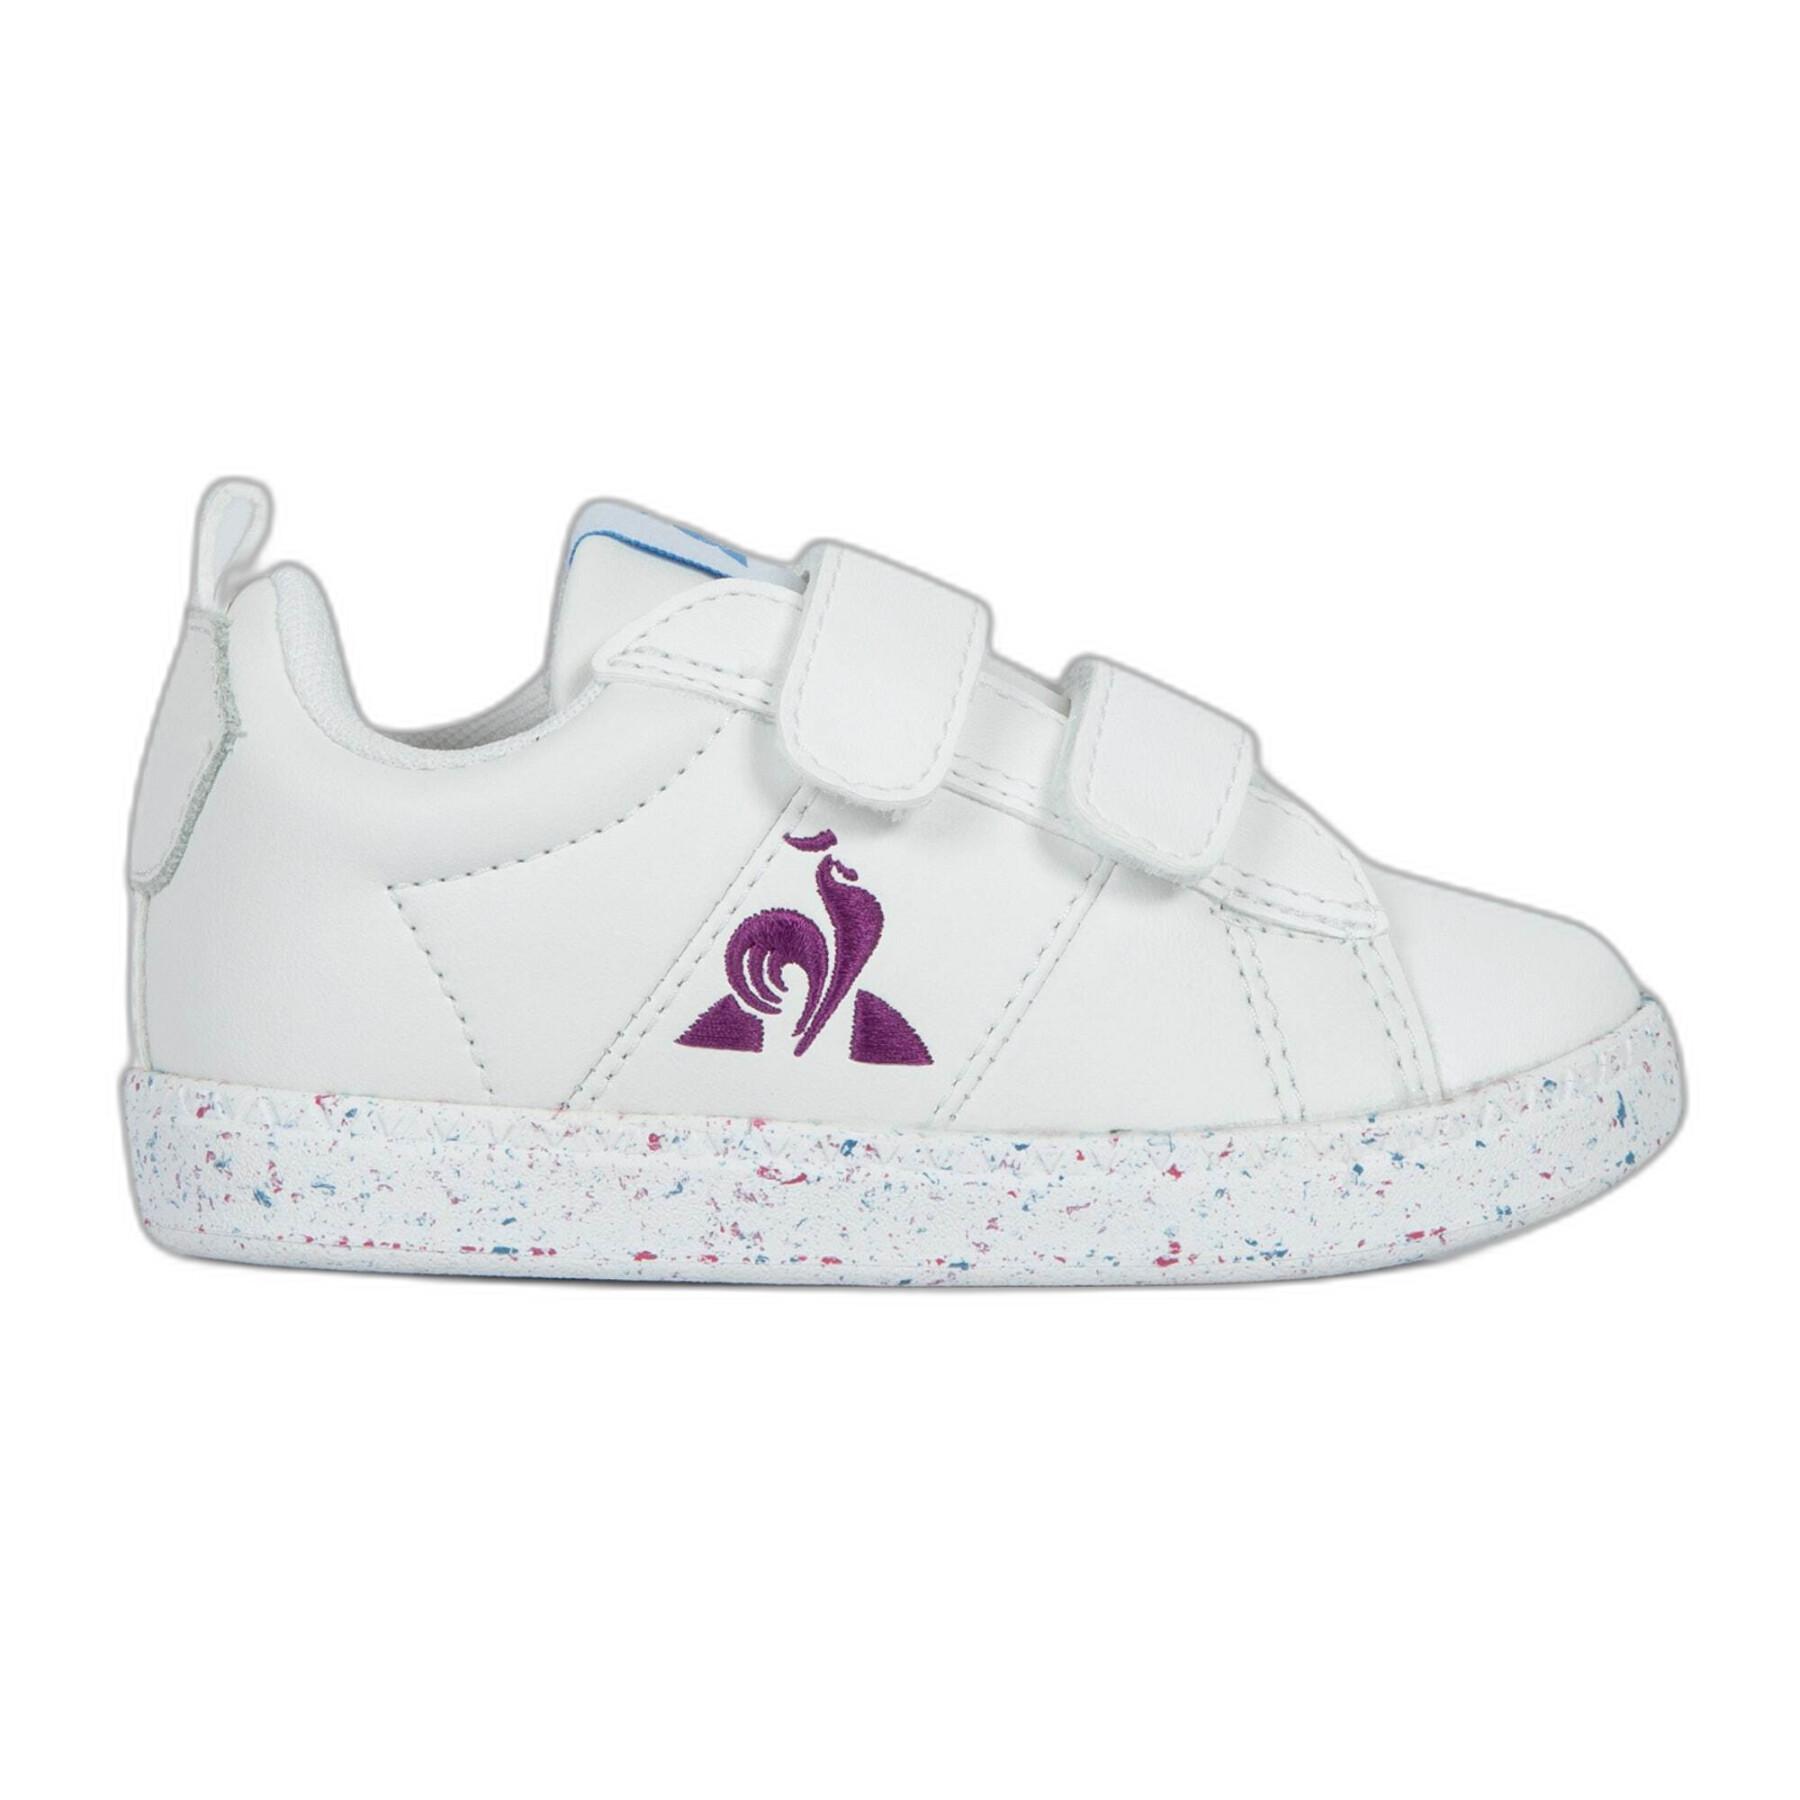 Girl sneakers Le Coq Sportif Courtclassic Inf